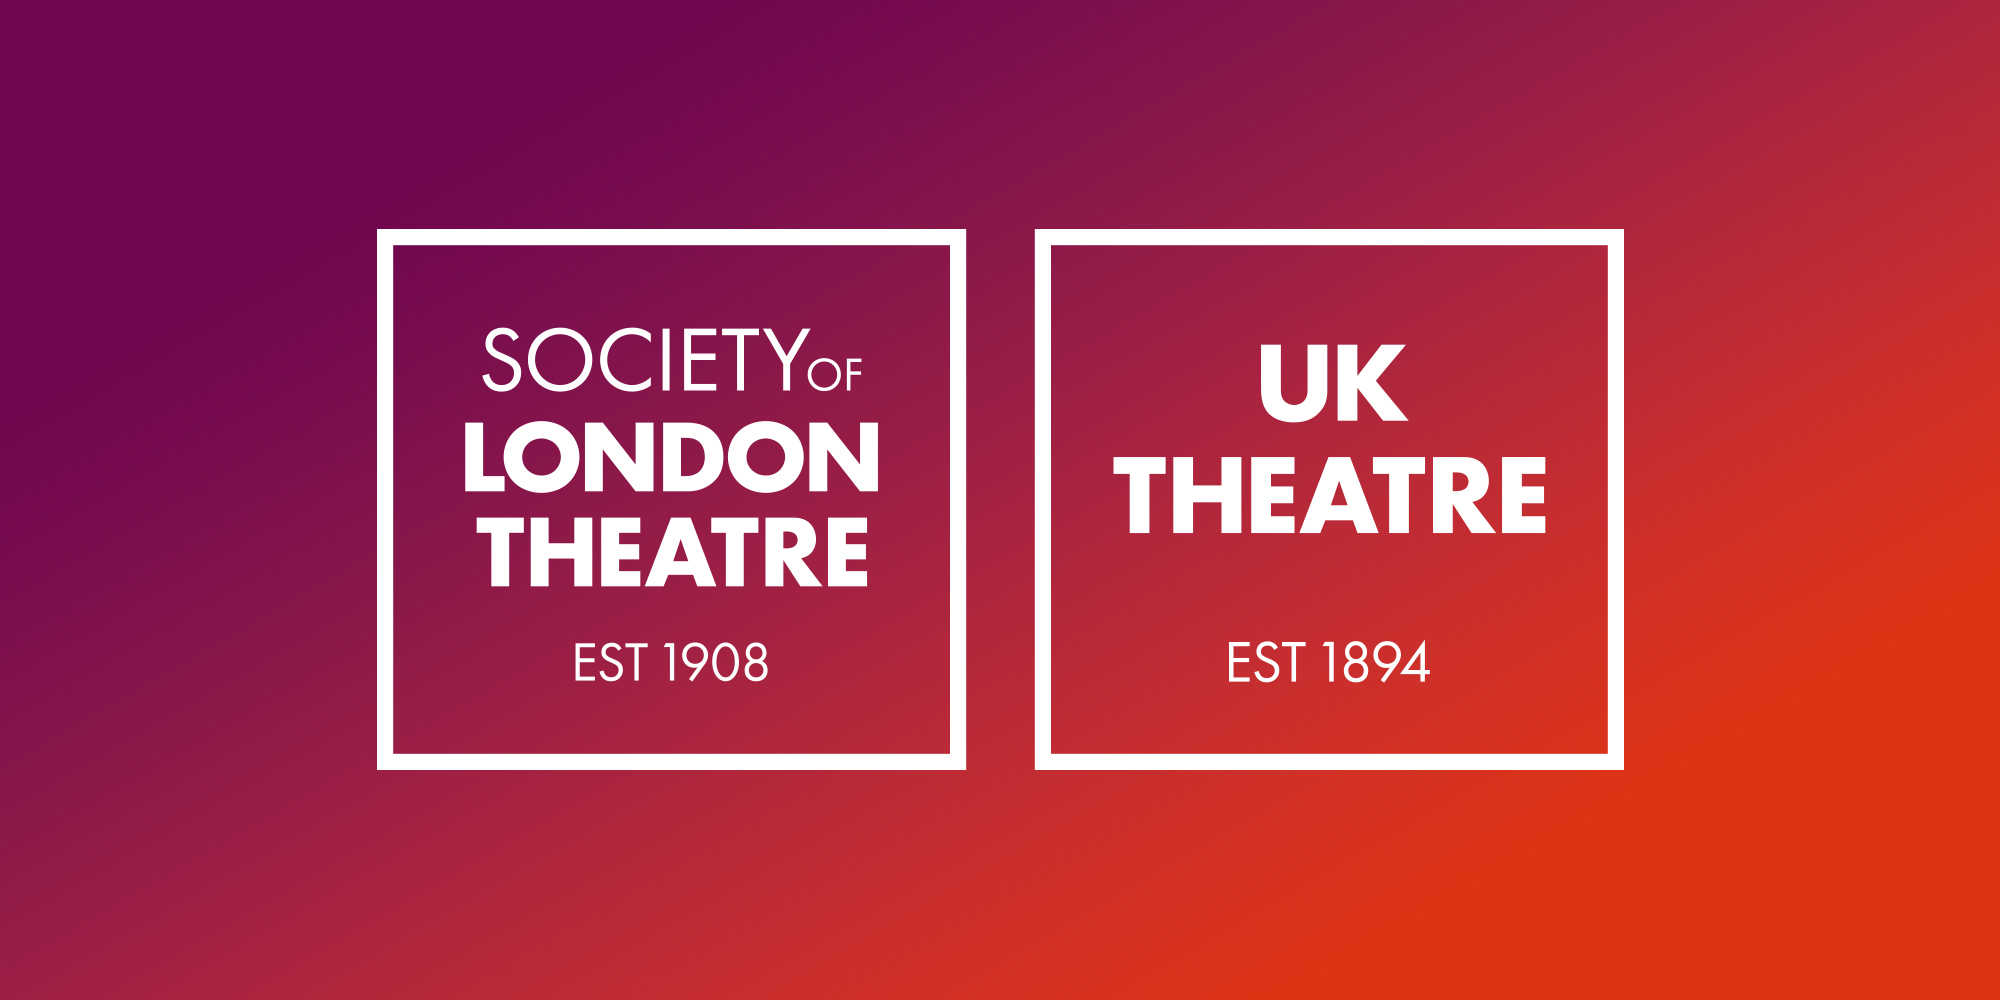 Over 600 theatre sector leaders attend Theatre Conference in the UK 